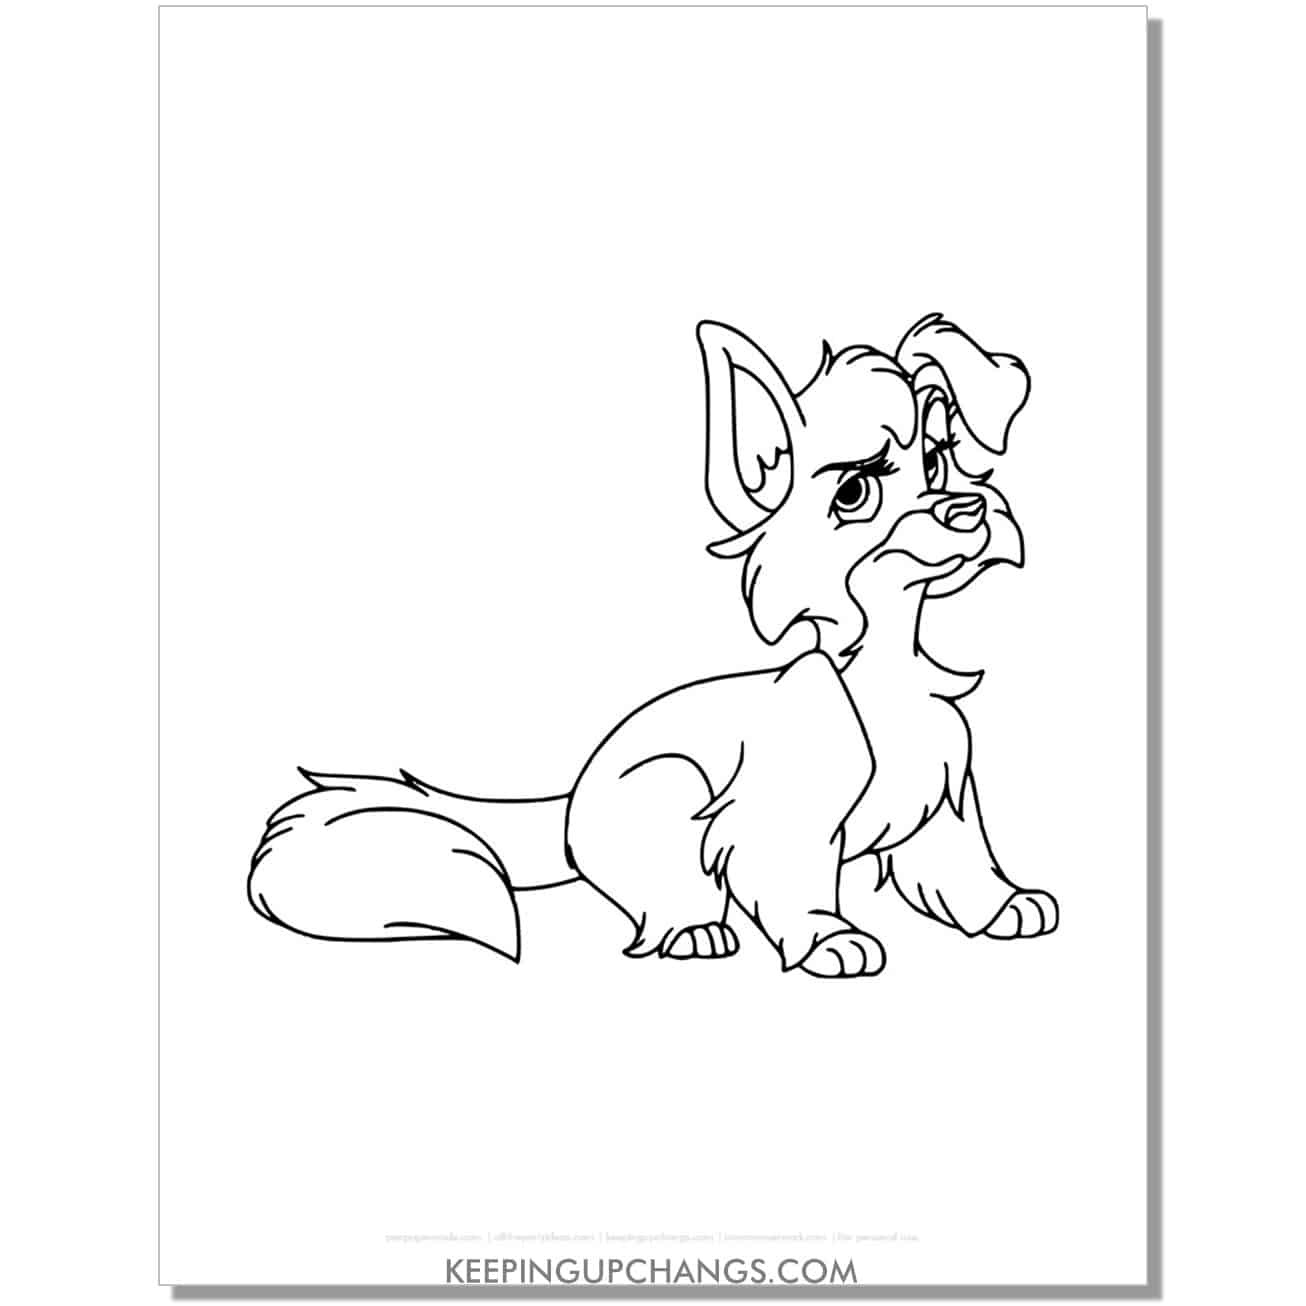 free angel with raised eyebrows from lady and the tramp coloring page, sheet.